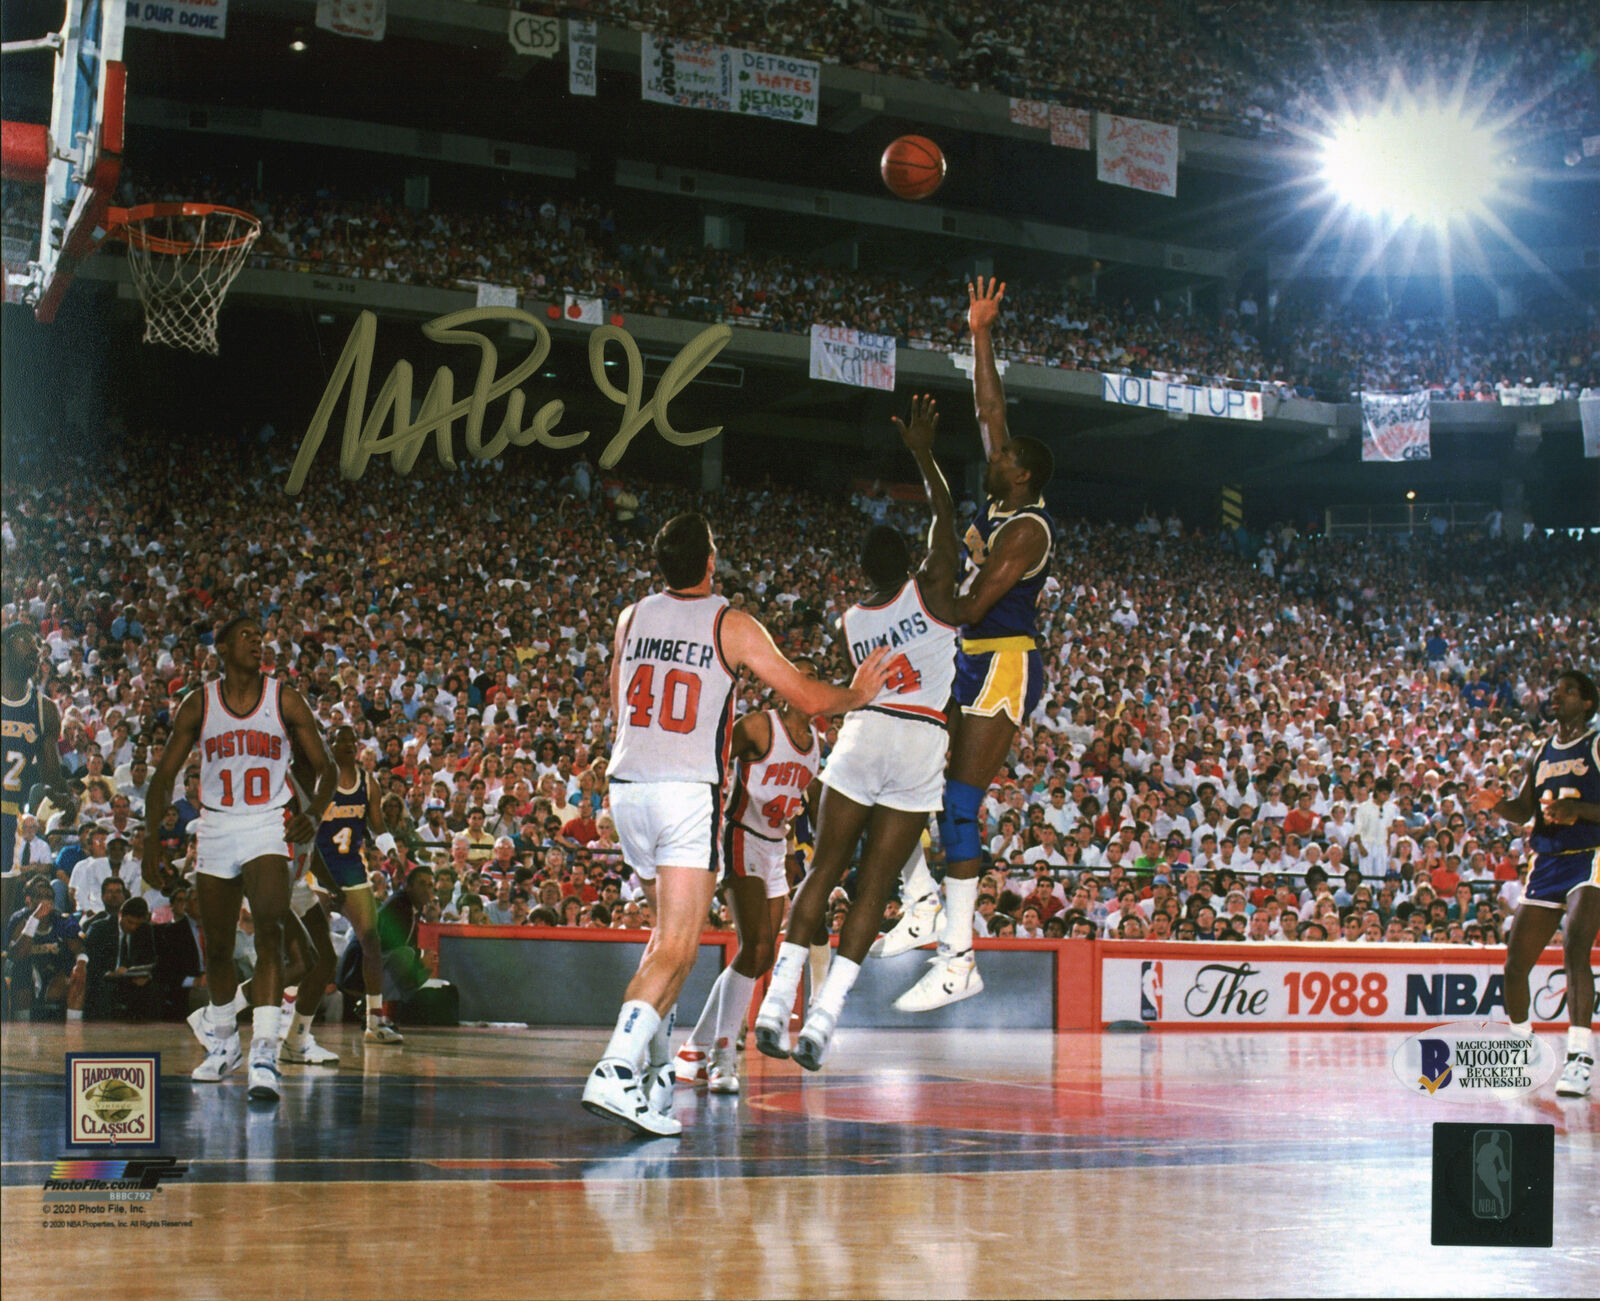 Lakers Magic Johnson Authentic Signed 8x10 1988 Finals Photo Poster painting BAS Witnessed